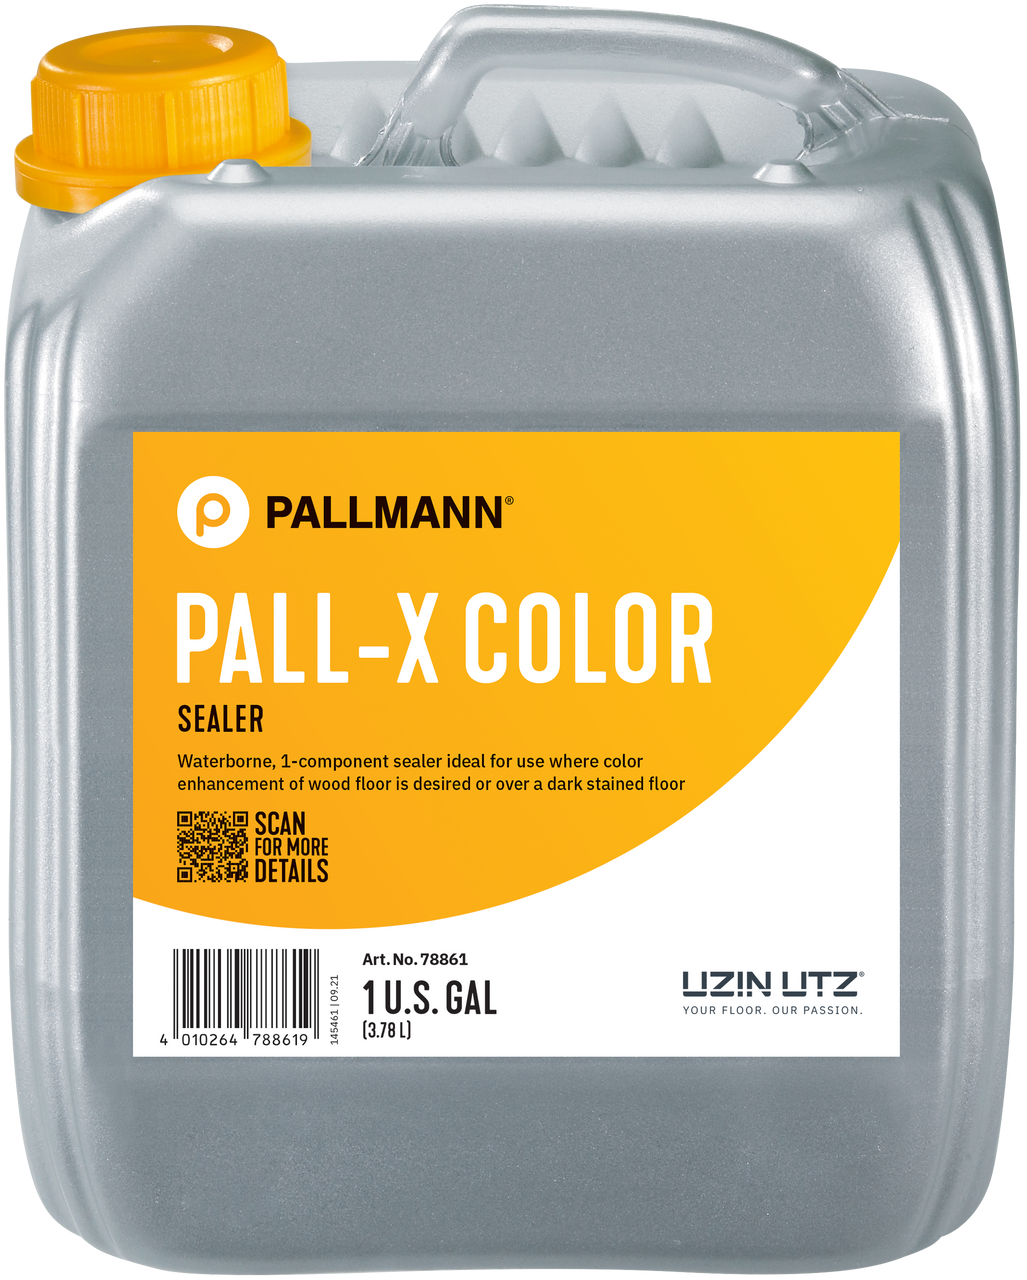 Pallmann Pall-x Color with new label design